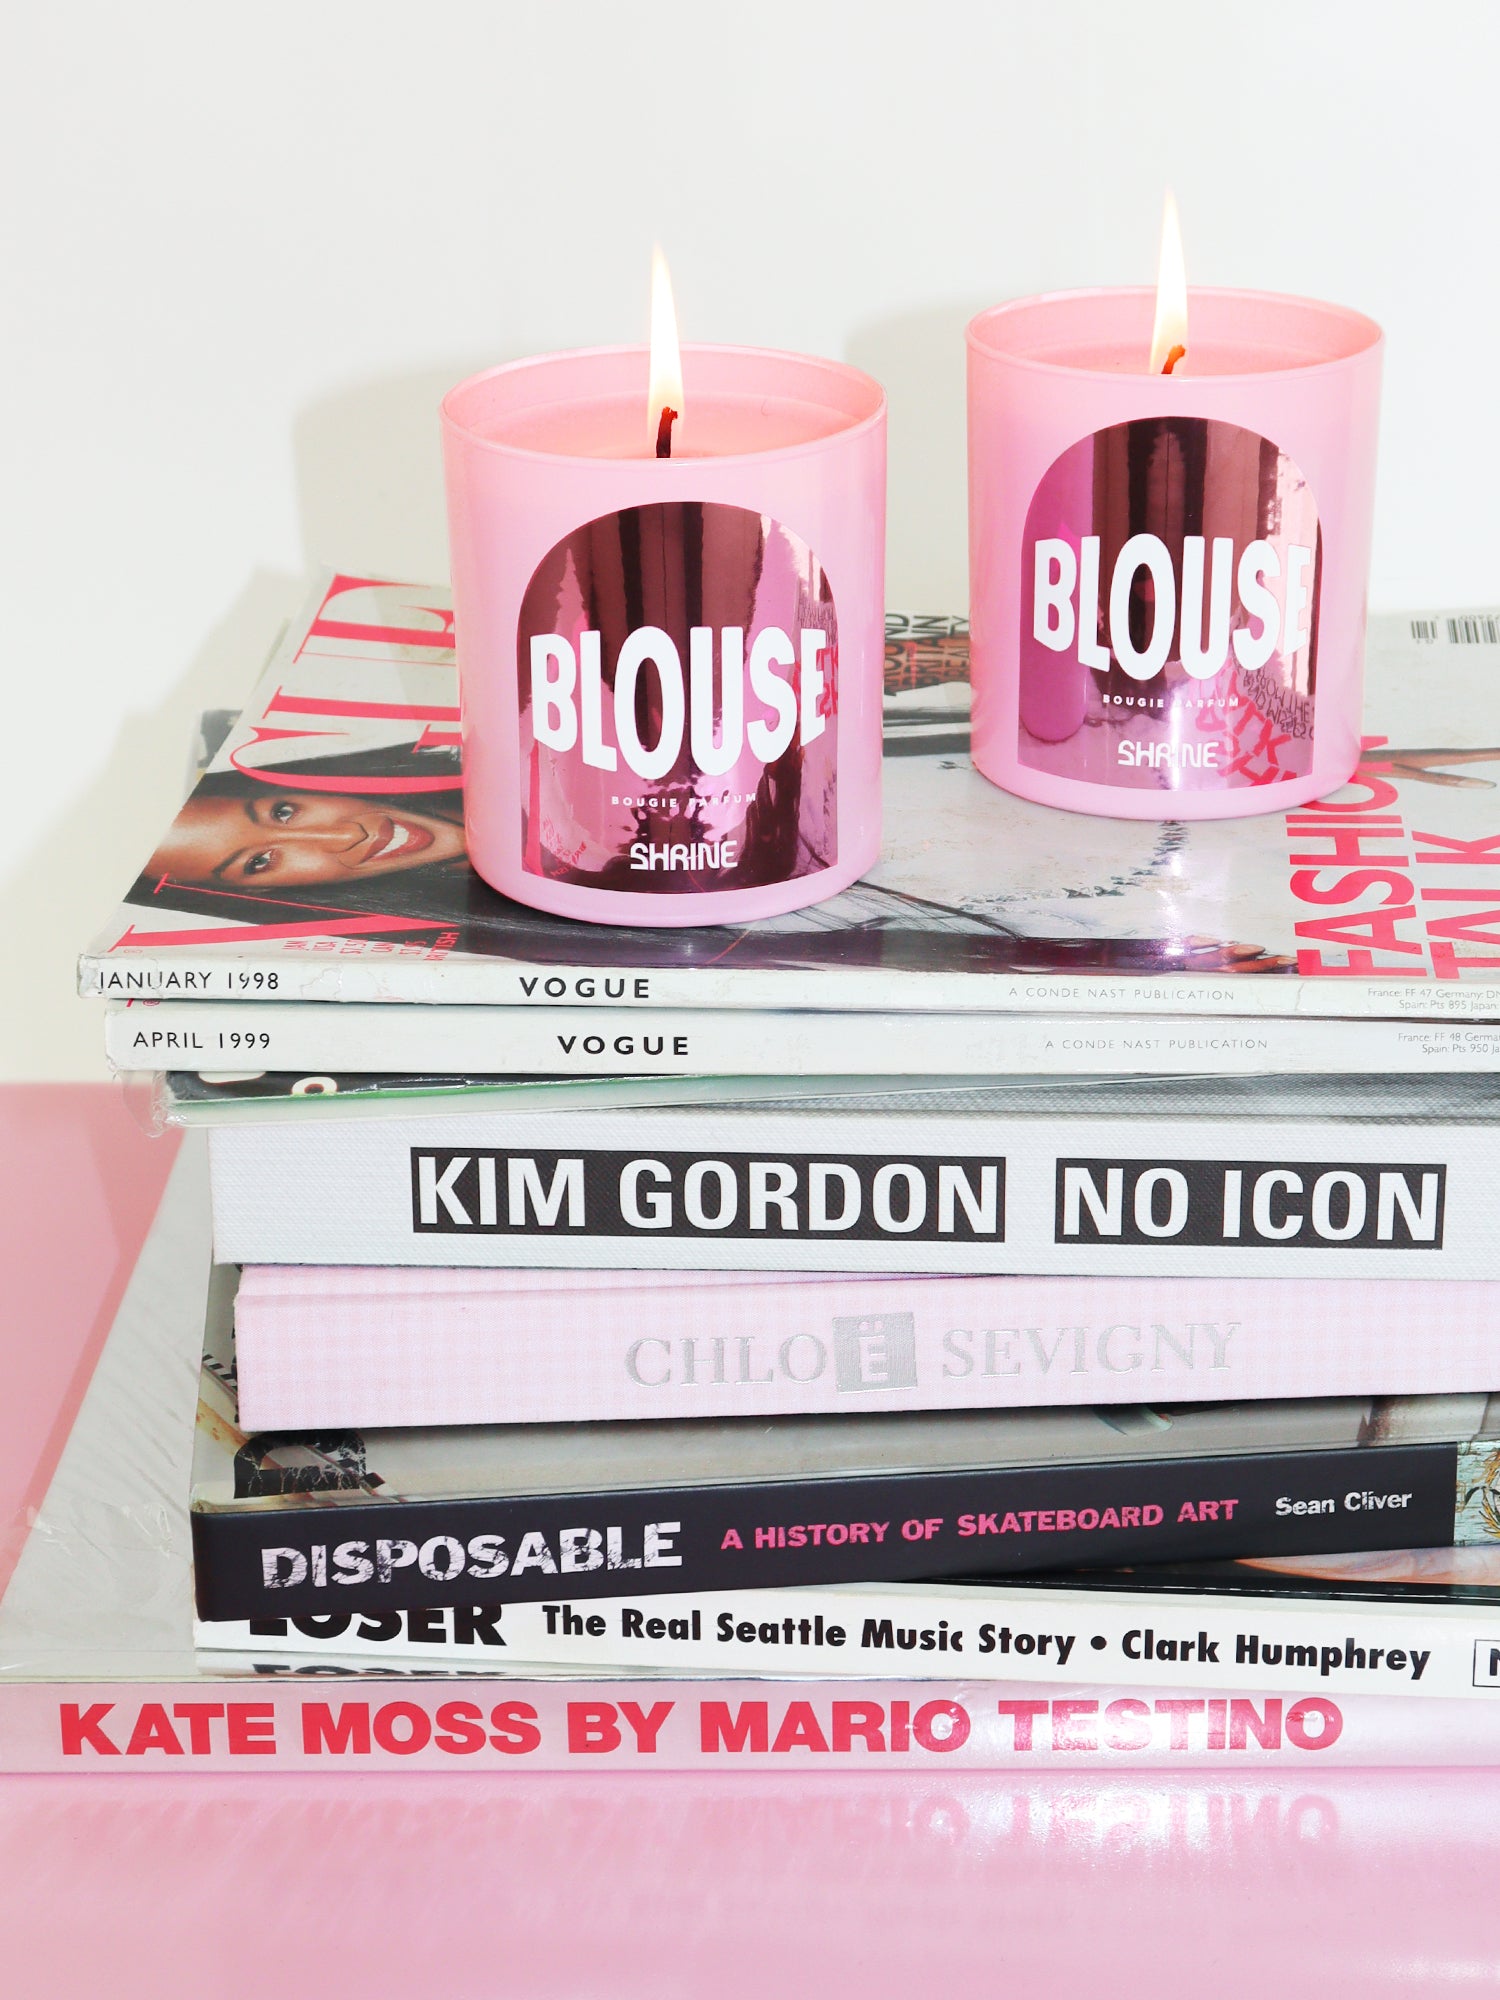 BLOUSE - PALE PINK FLORAL CANDLE – SHRINE